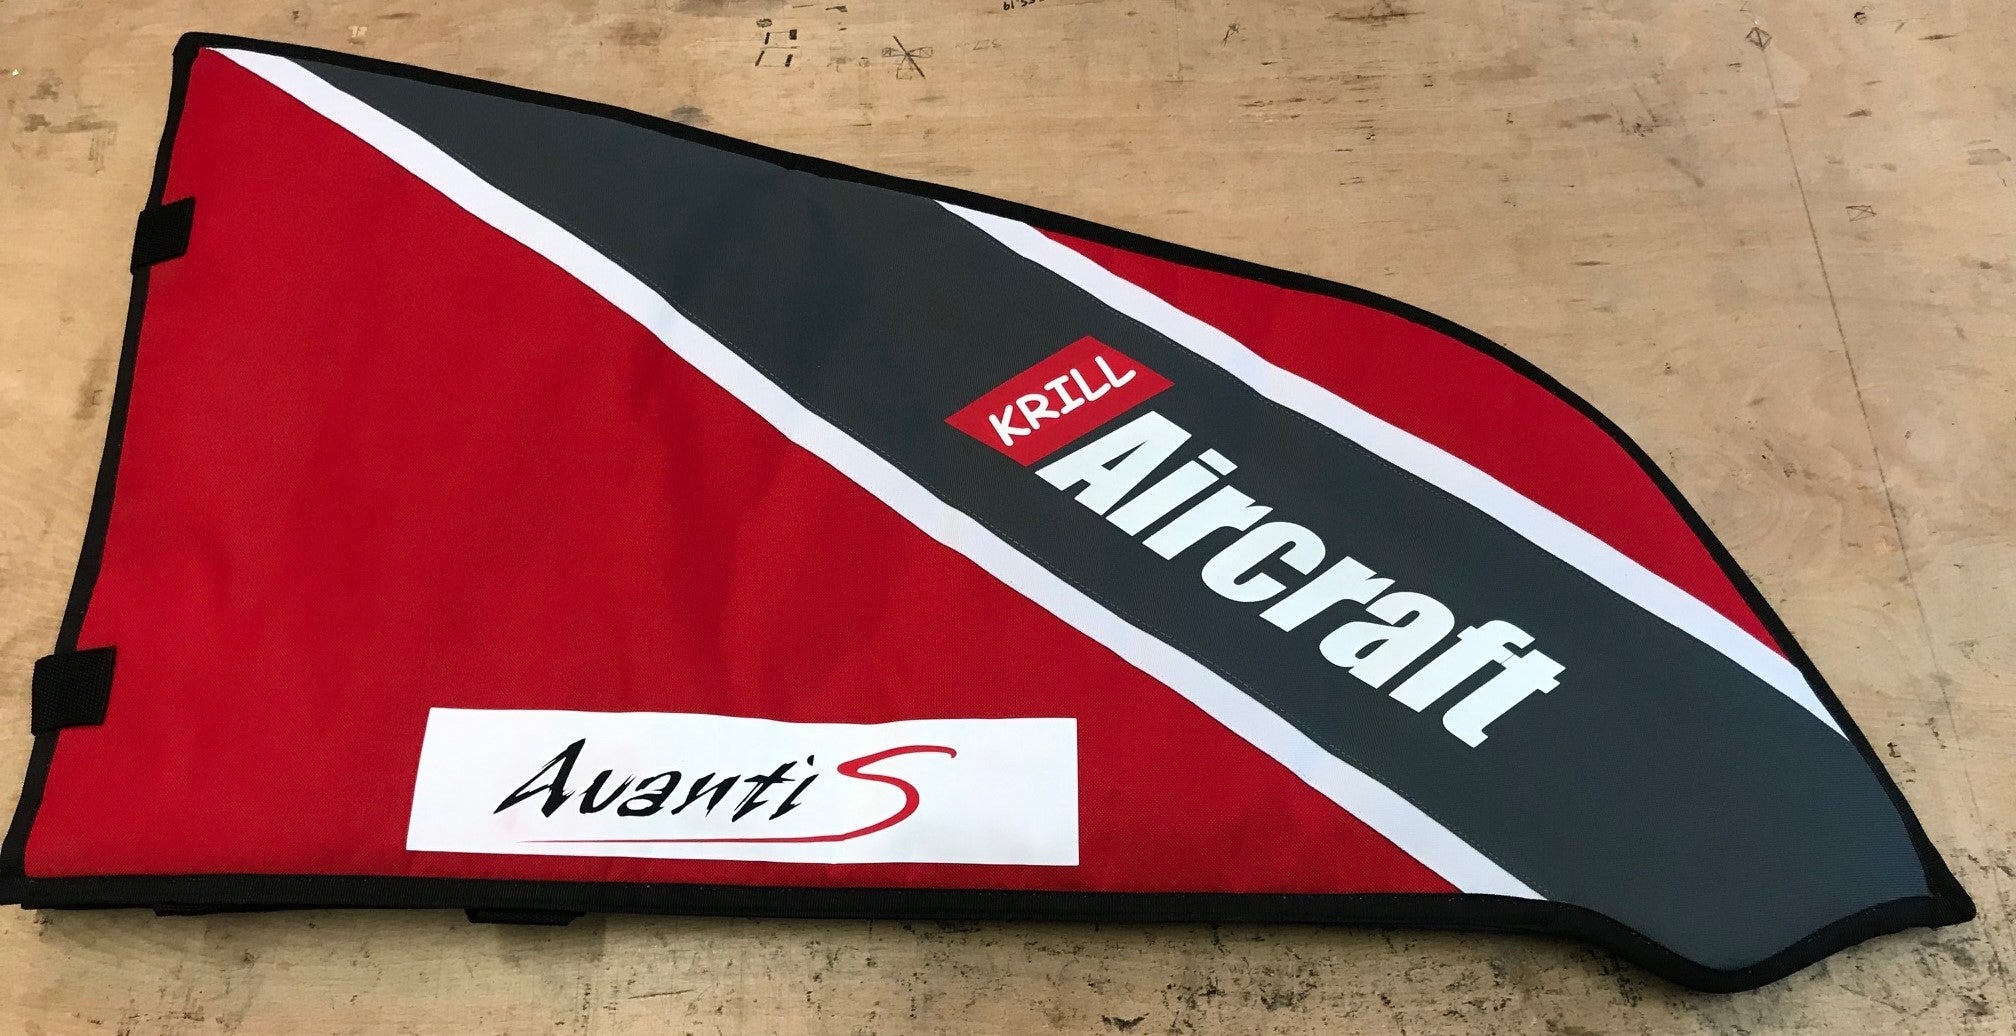 Revoc Krill Avanti S Complete Wing and Tail Bag Set